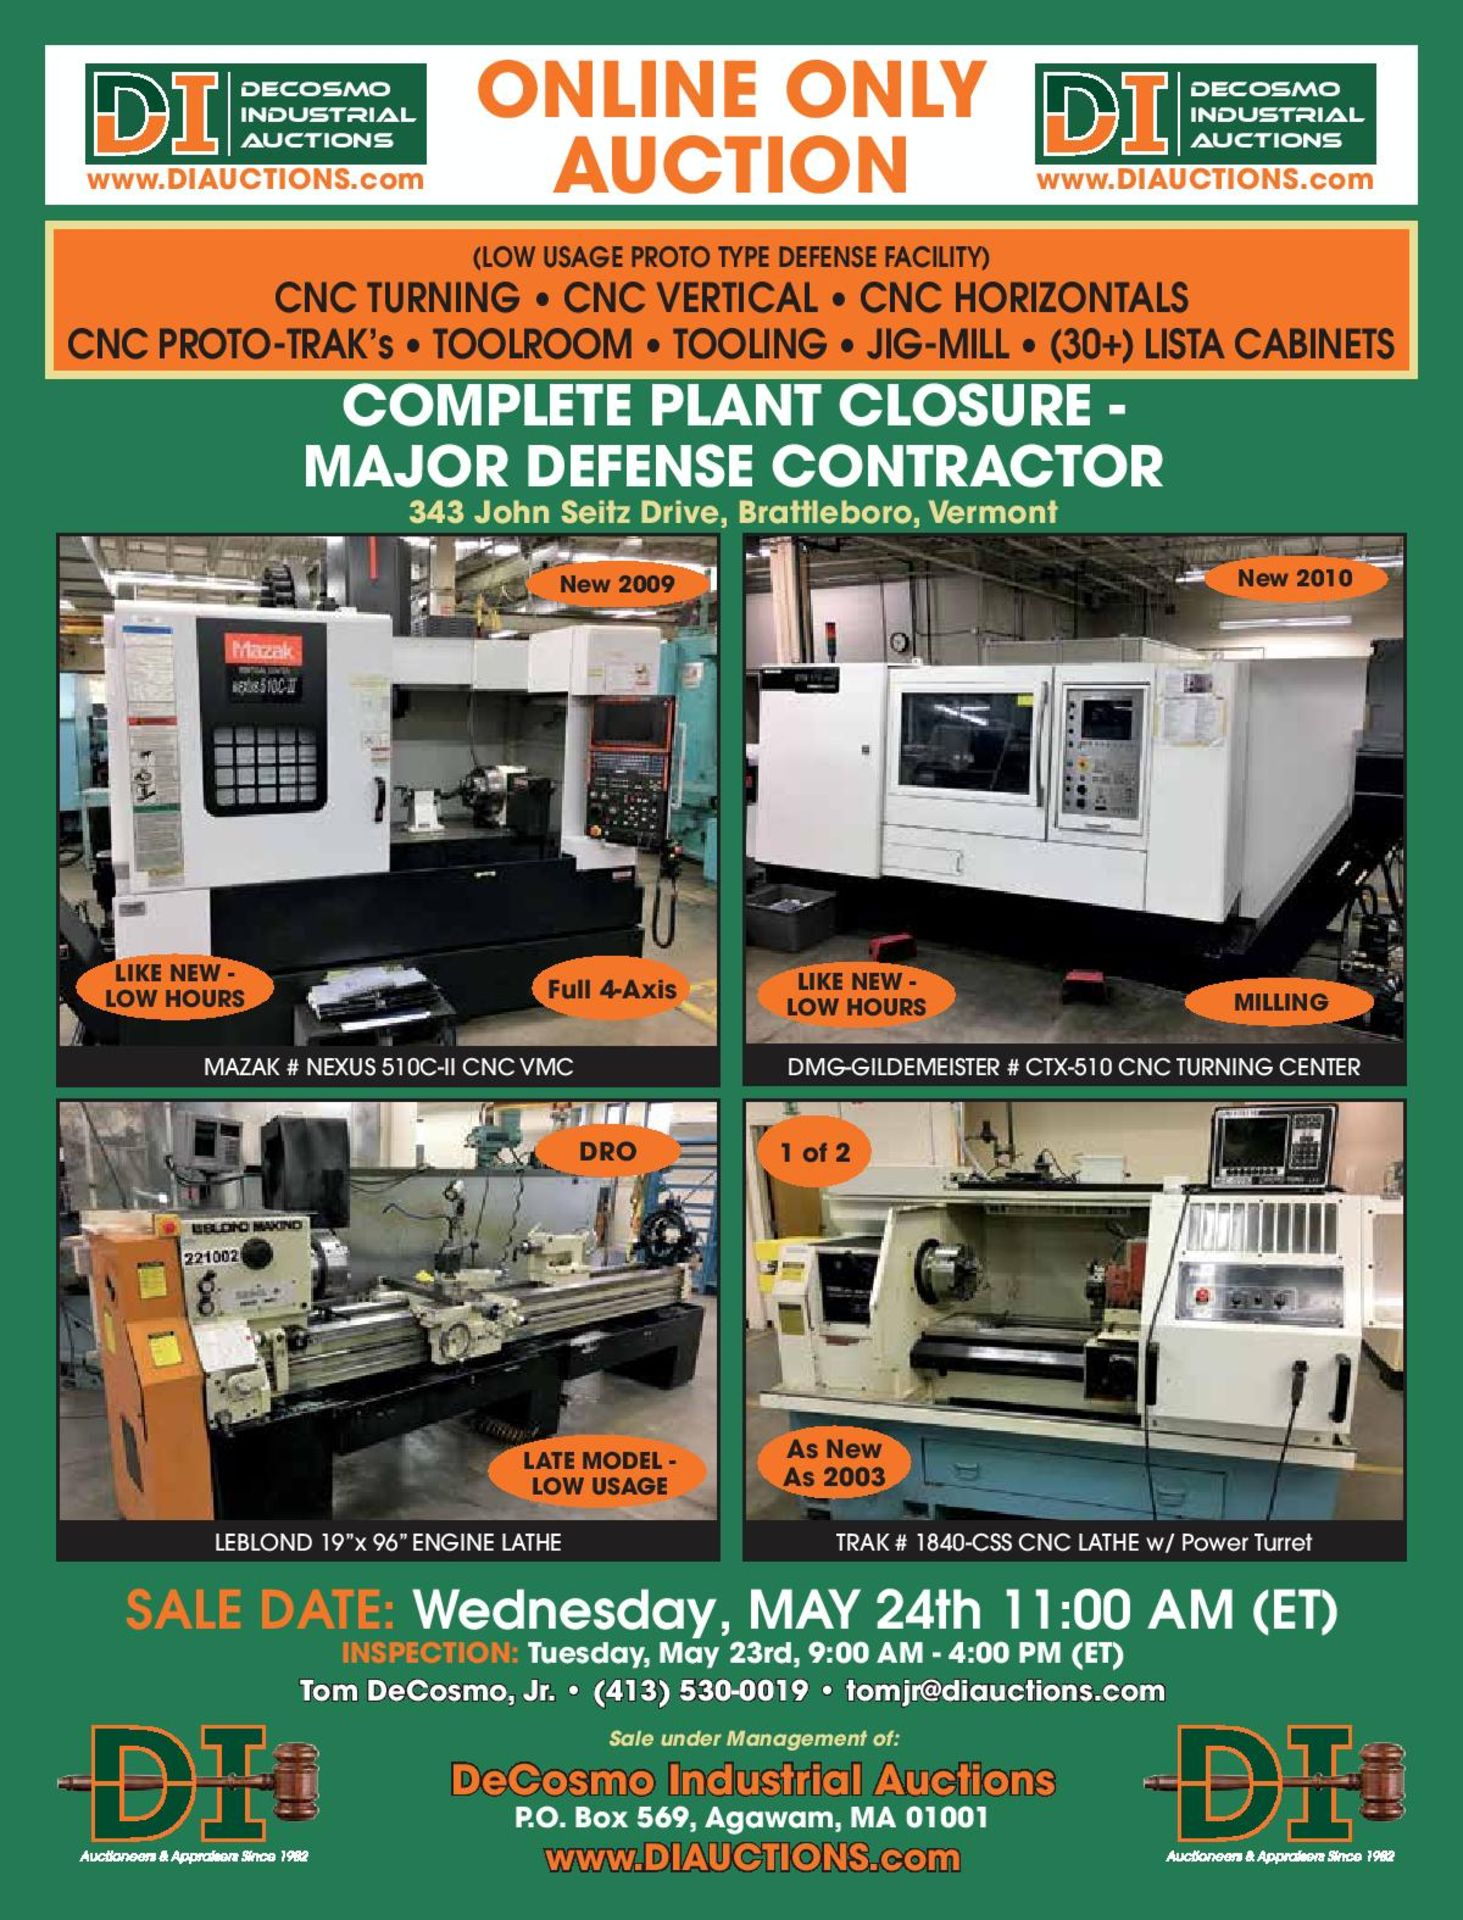 THIS AUCTION IS BEING CONDUCTED ON DeCOSMO INDUSTRIAL AUCTIONS WEBSITE